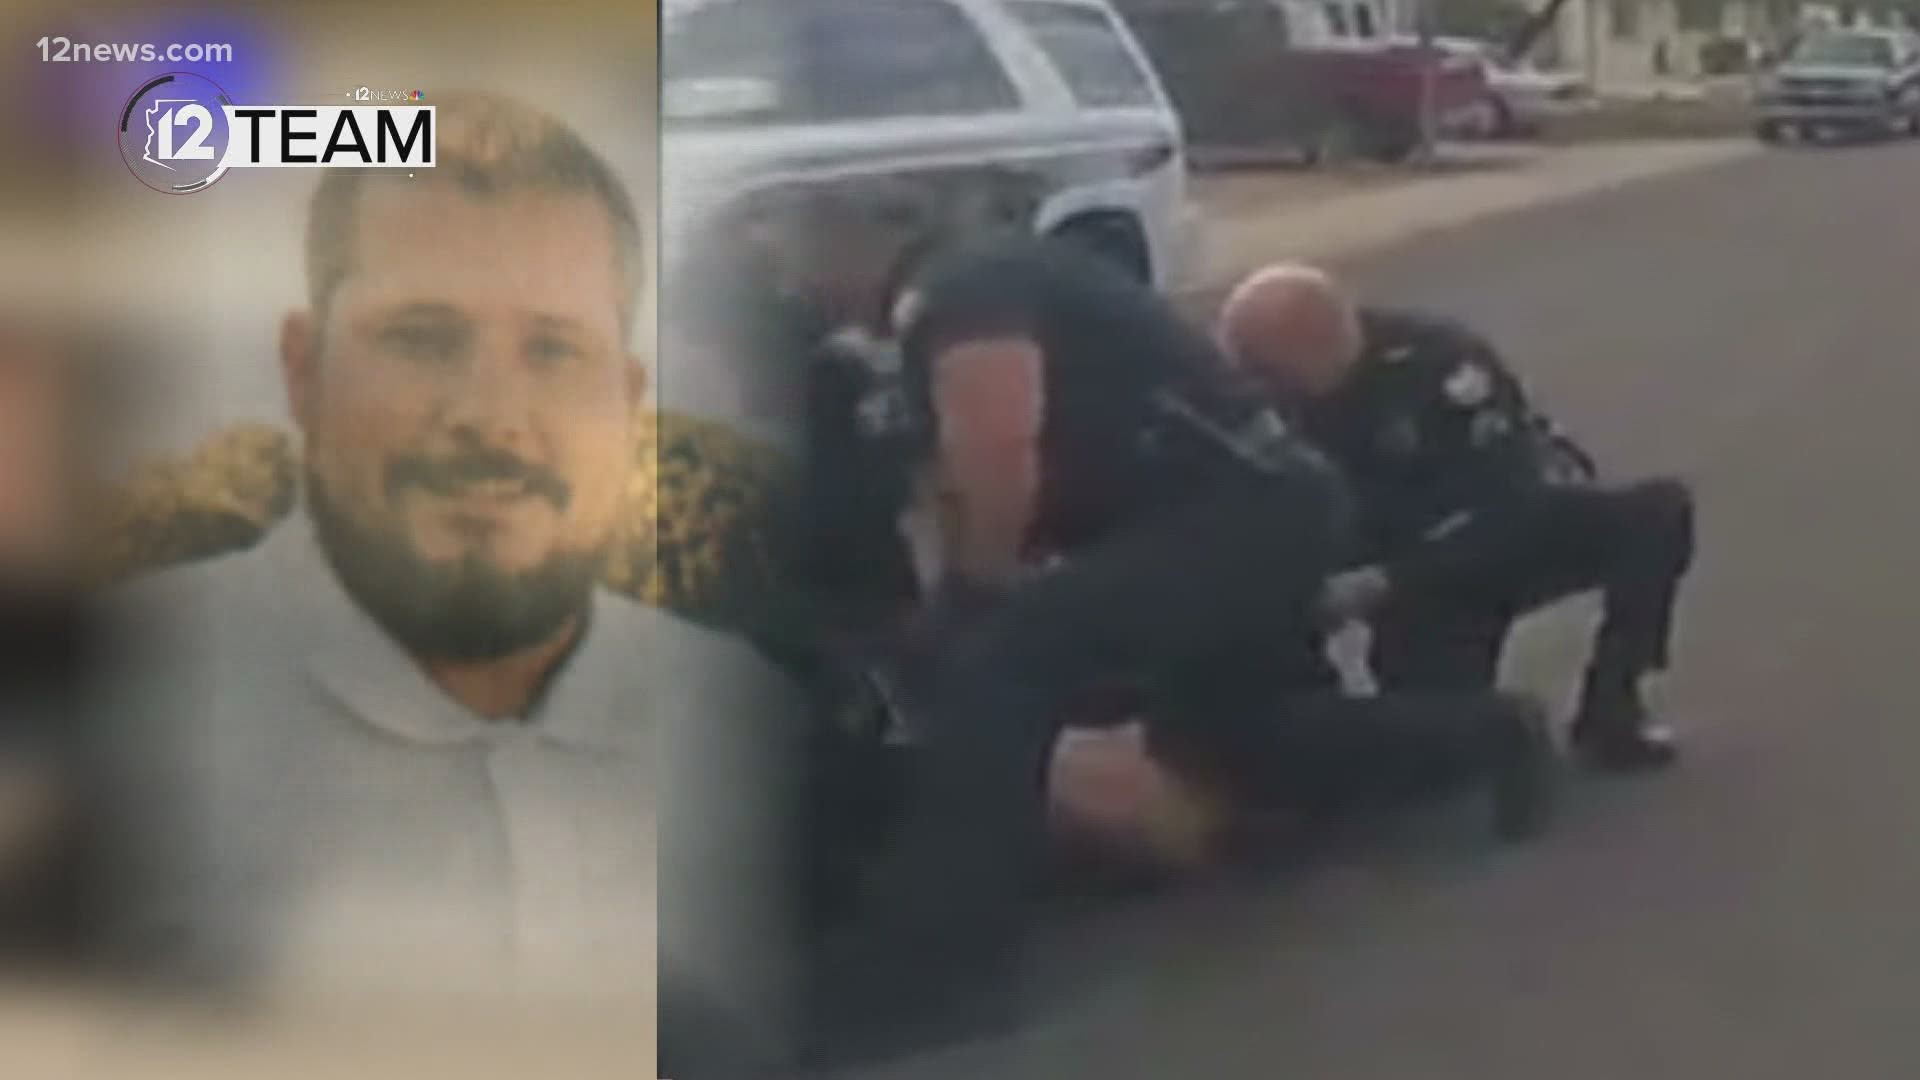 Police body camera footage during the aftermath of the 2019 incident suggests an officer tased Casey Wells while he was already face-down and in handcuffs.